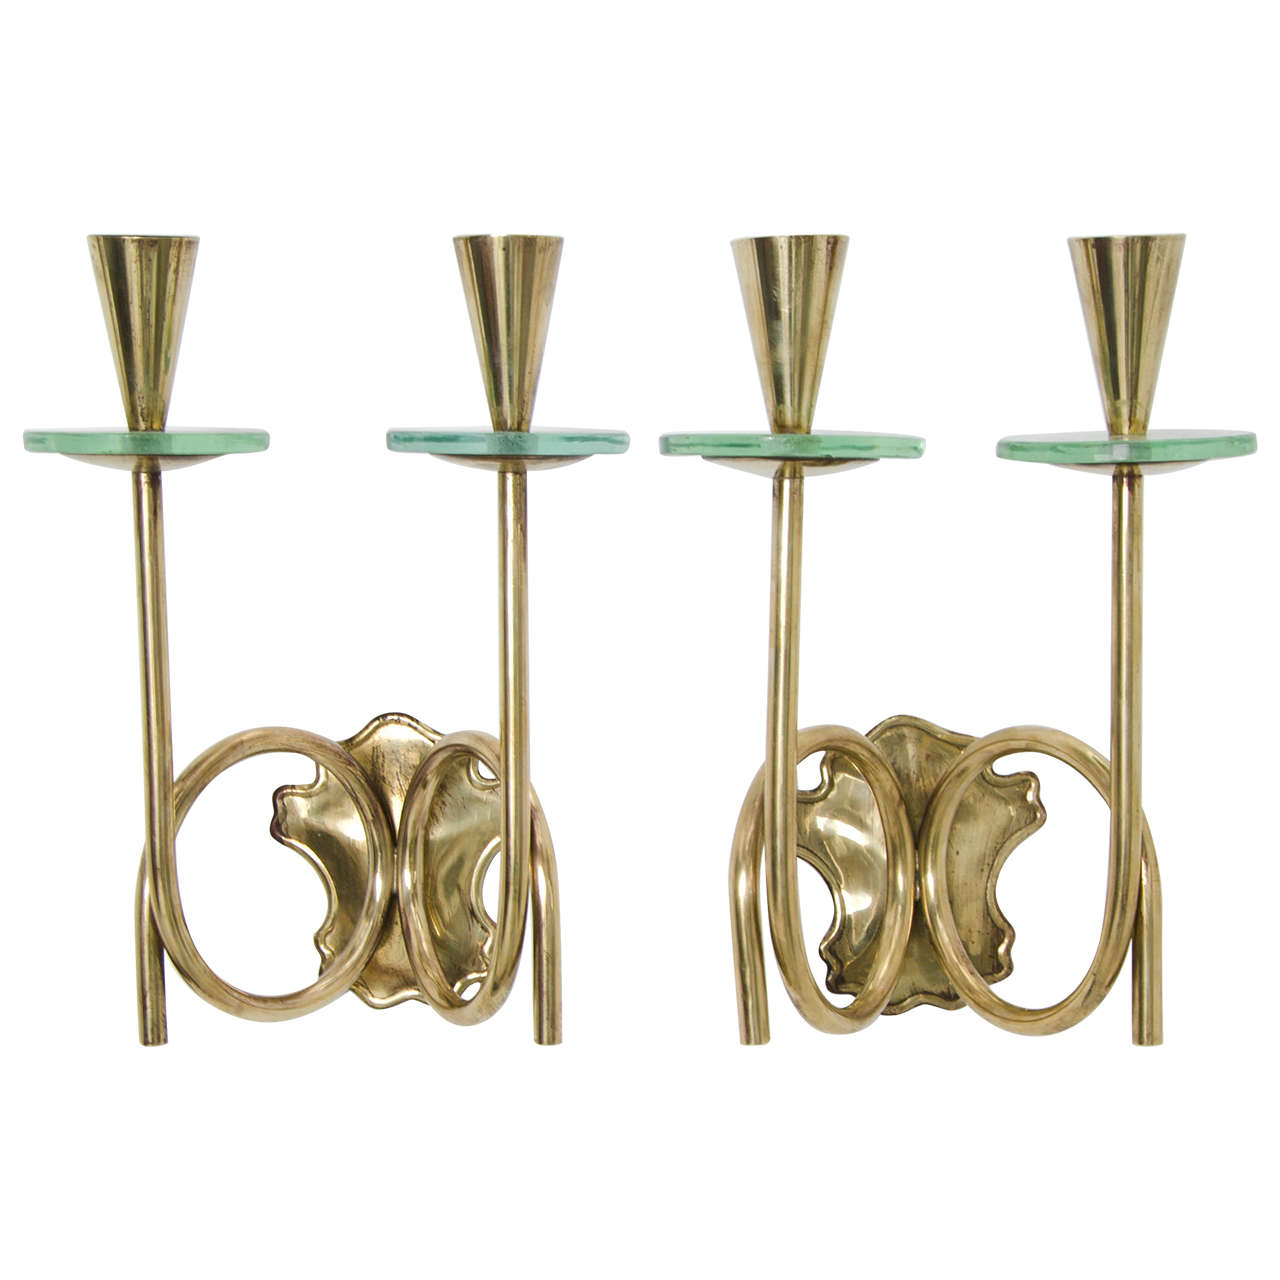 Pair of Midcentury Brass Sconces in the Style of Fontana Arte